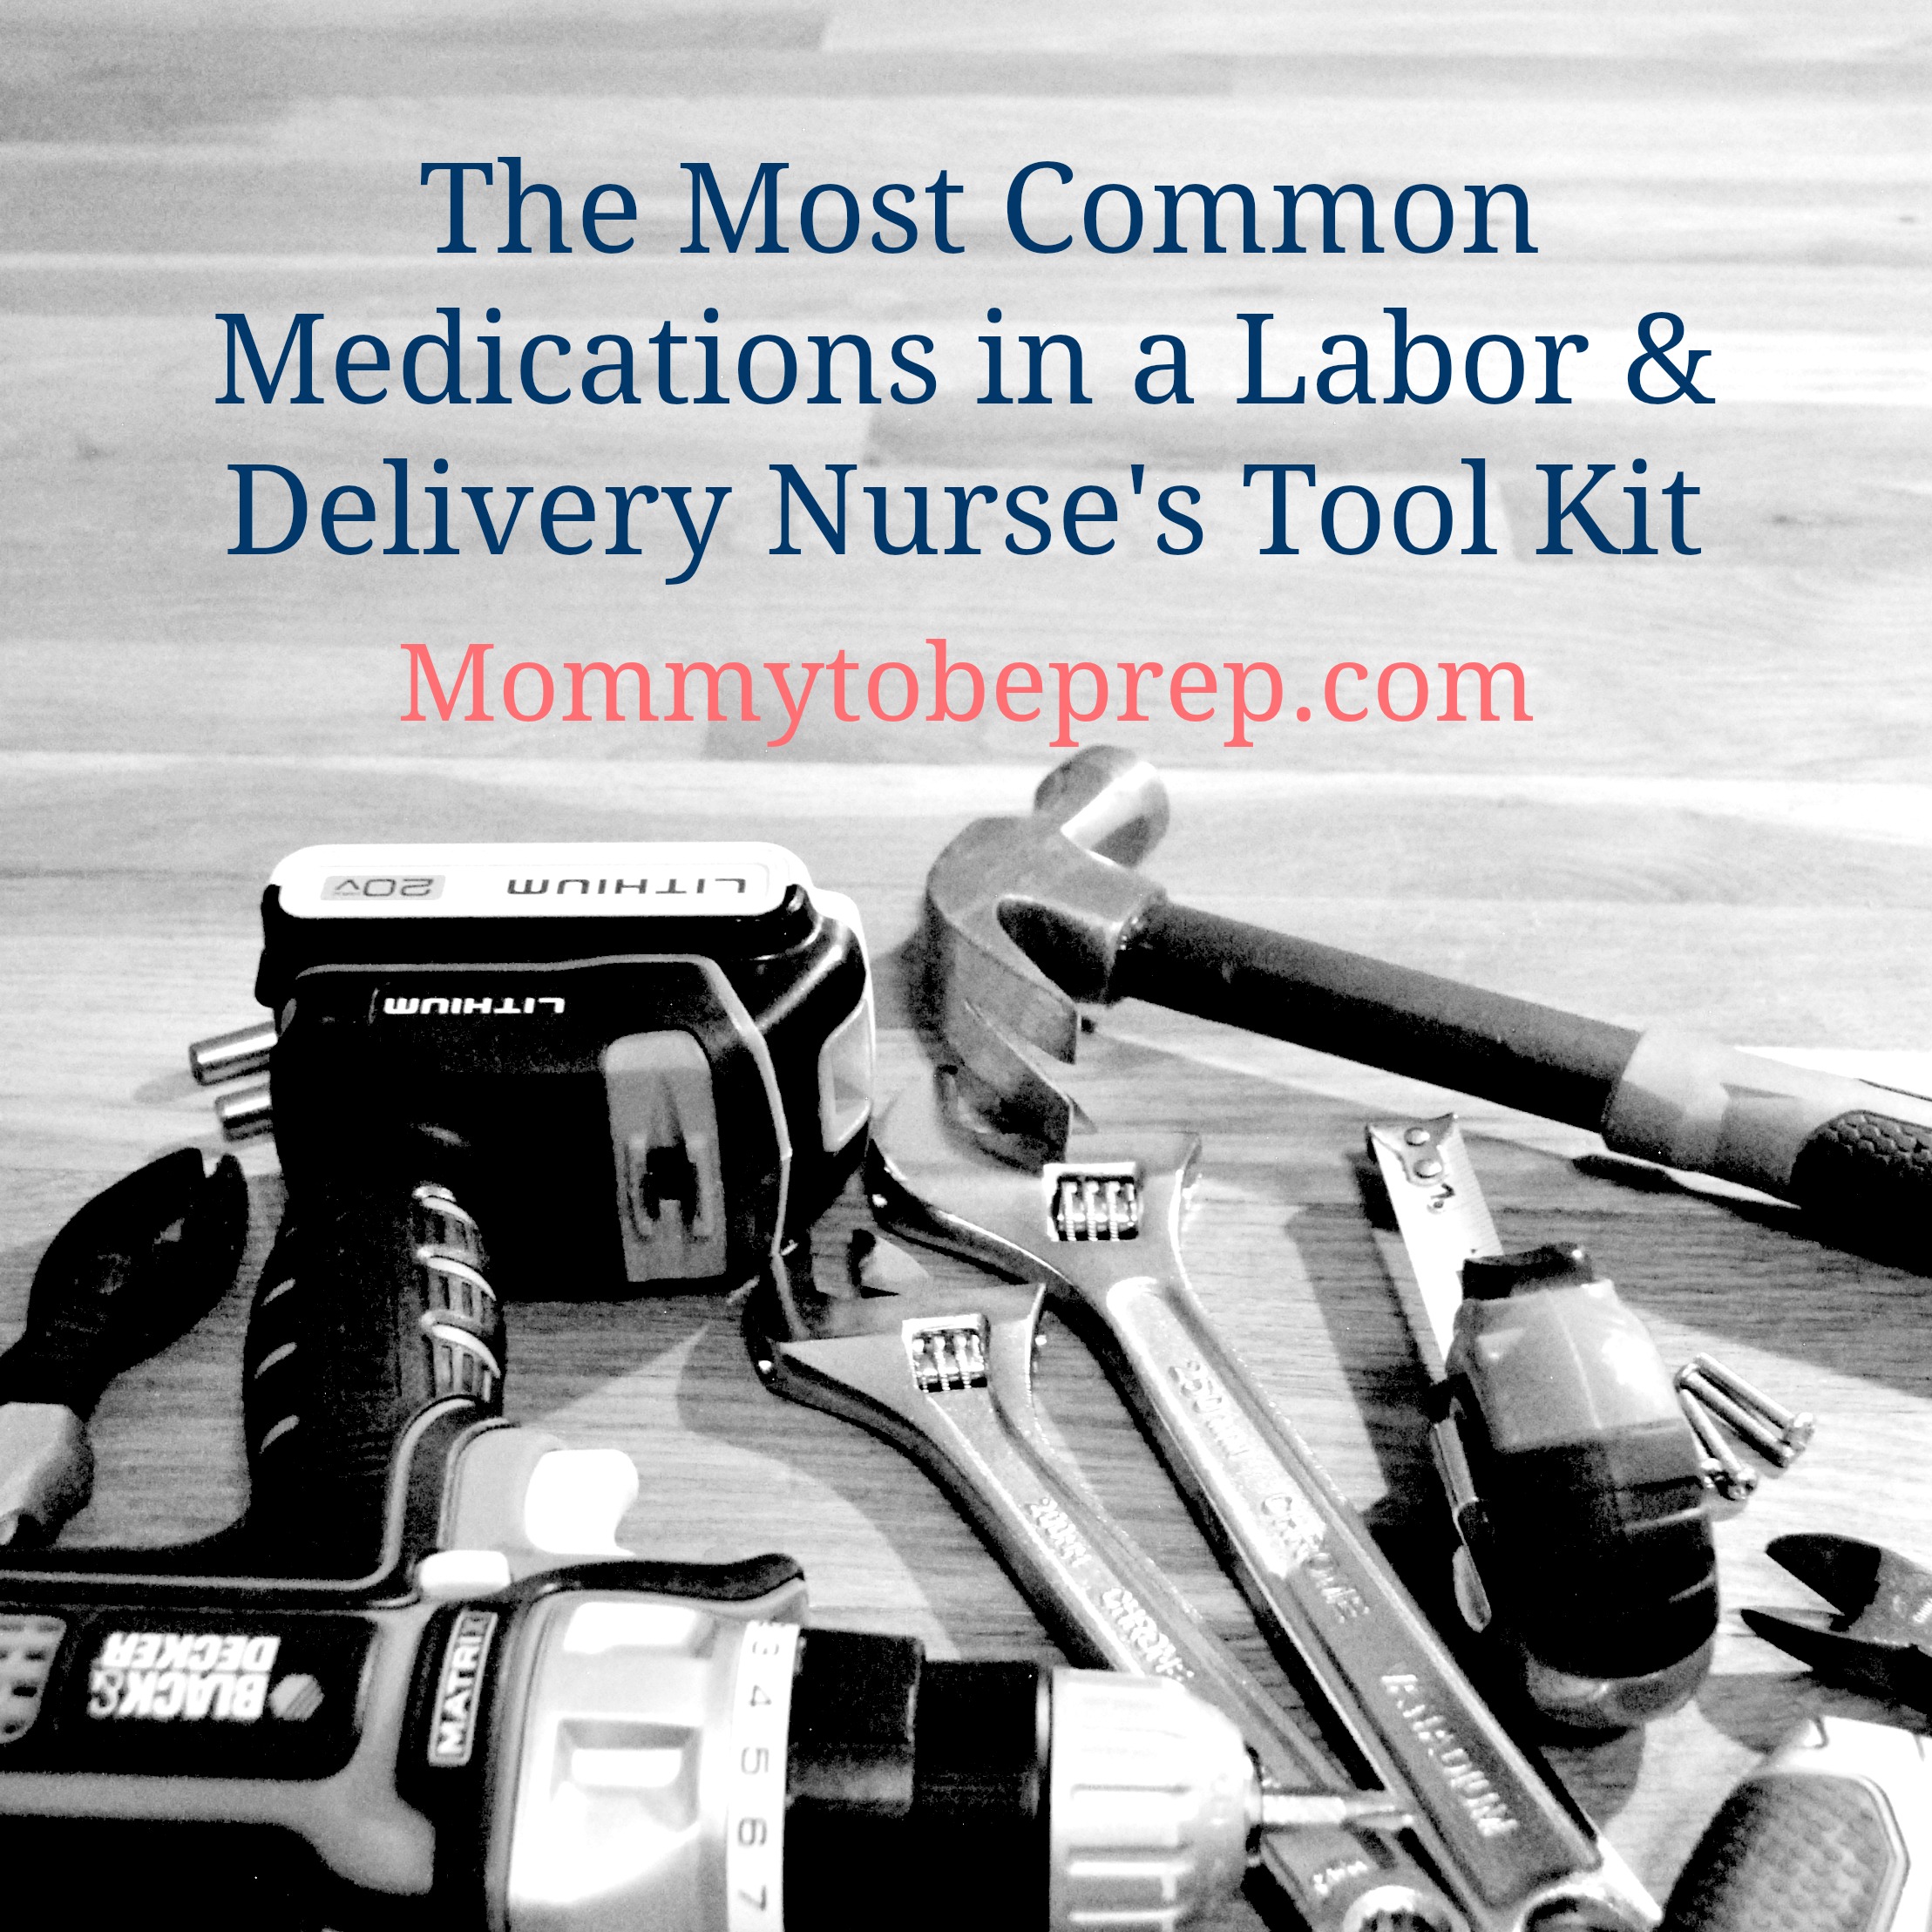 The Most Common Medications in Labor & Delivery